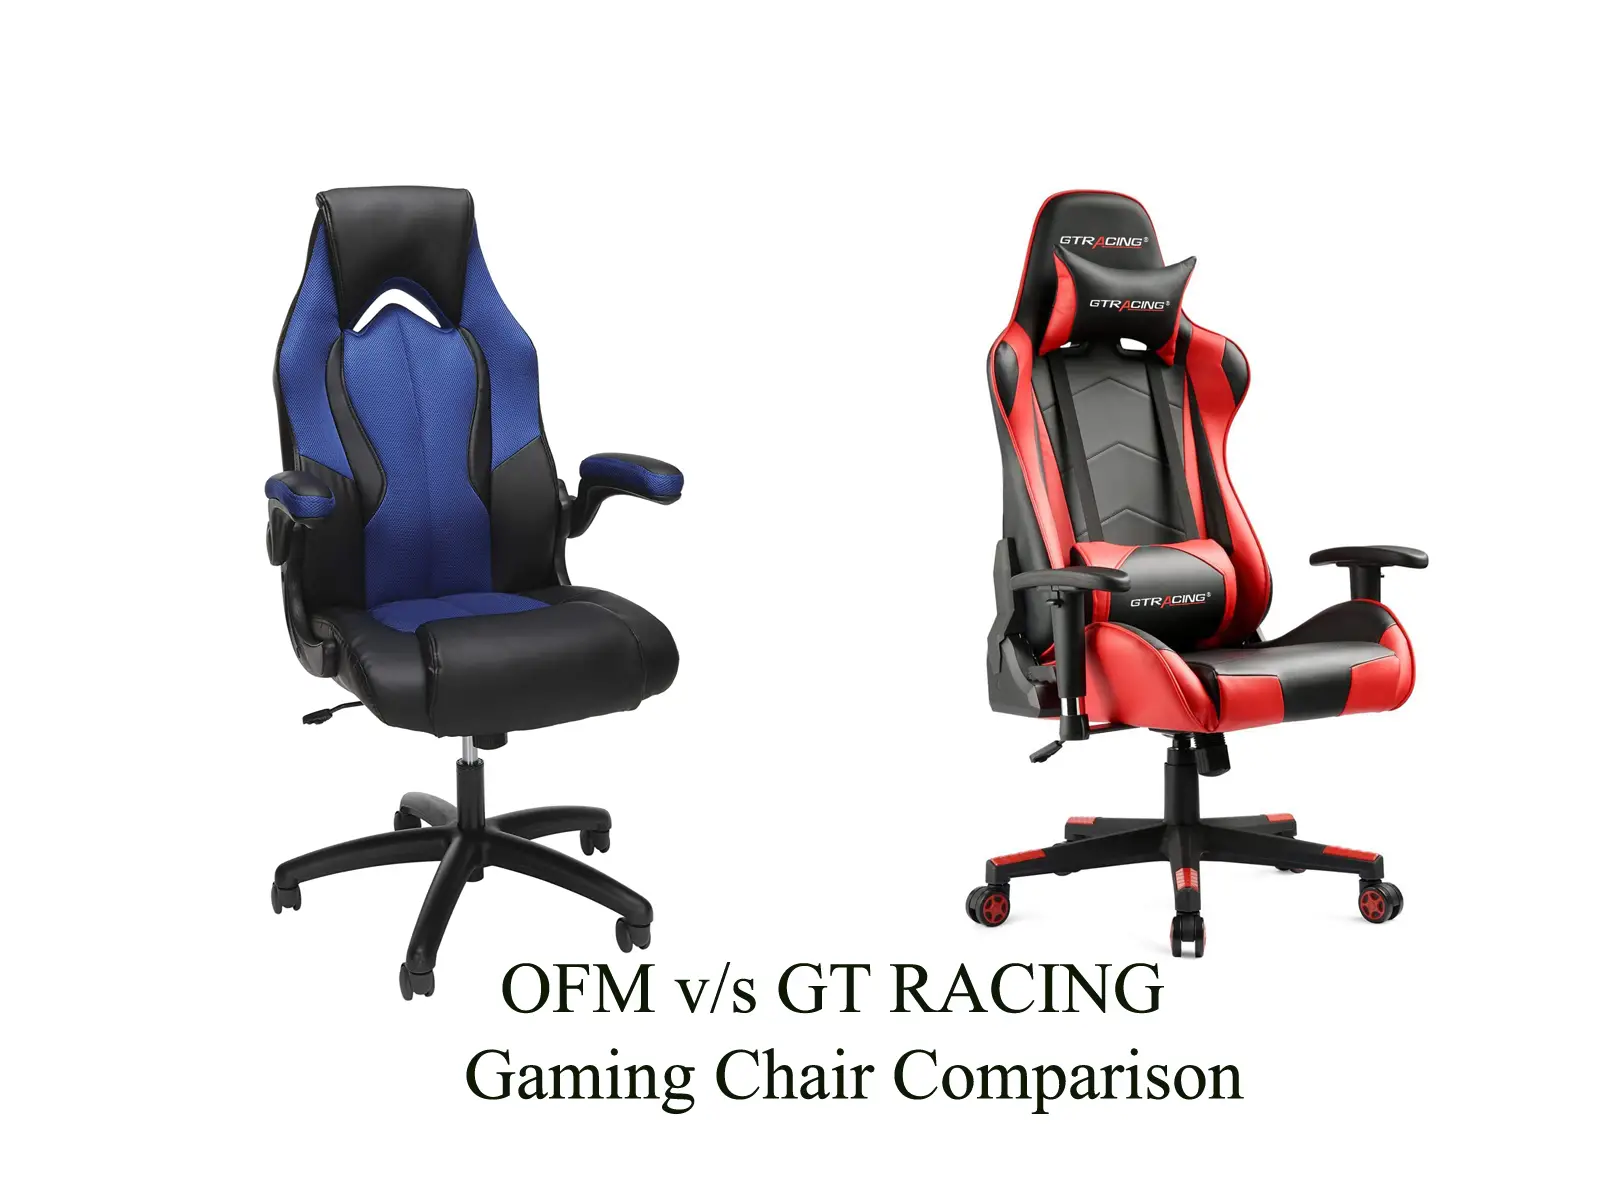 OFM V/S GT Racing gaming chair Comparison and Review